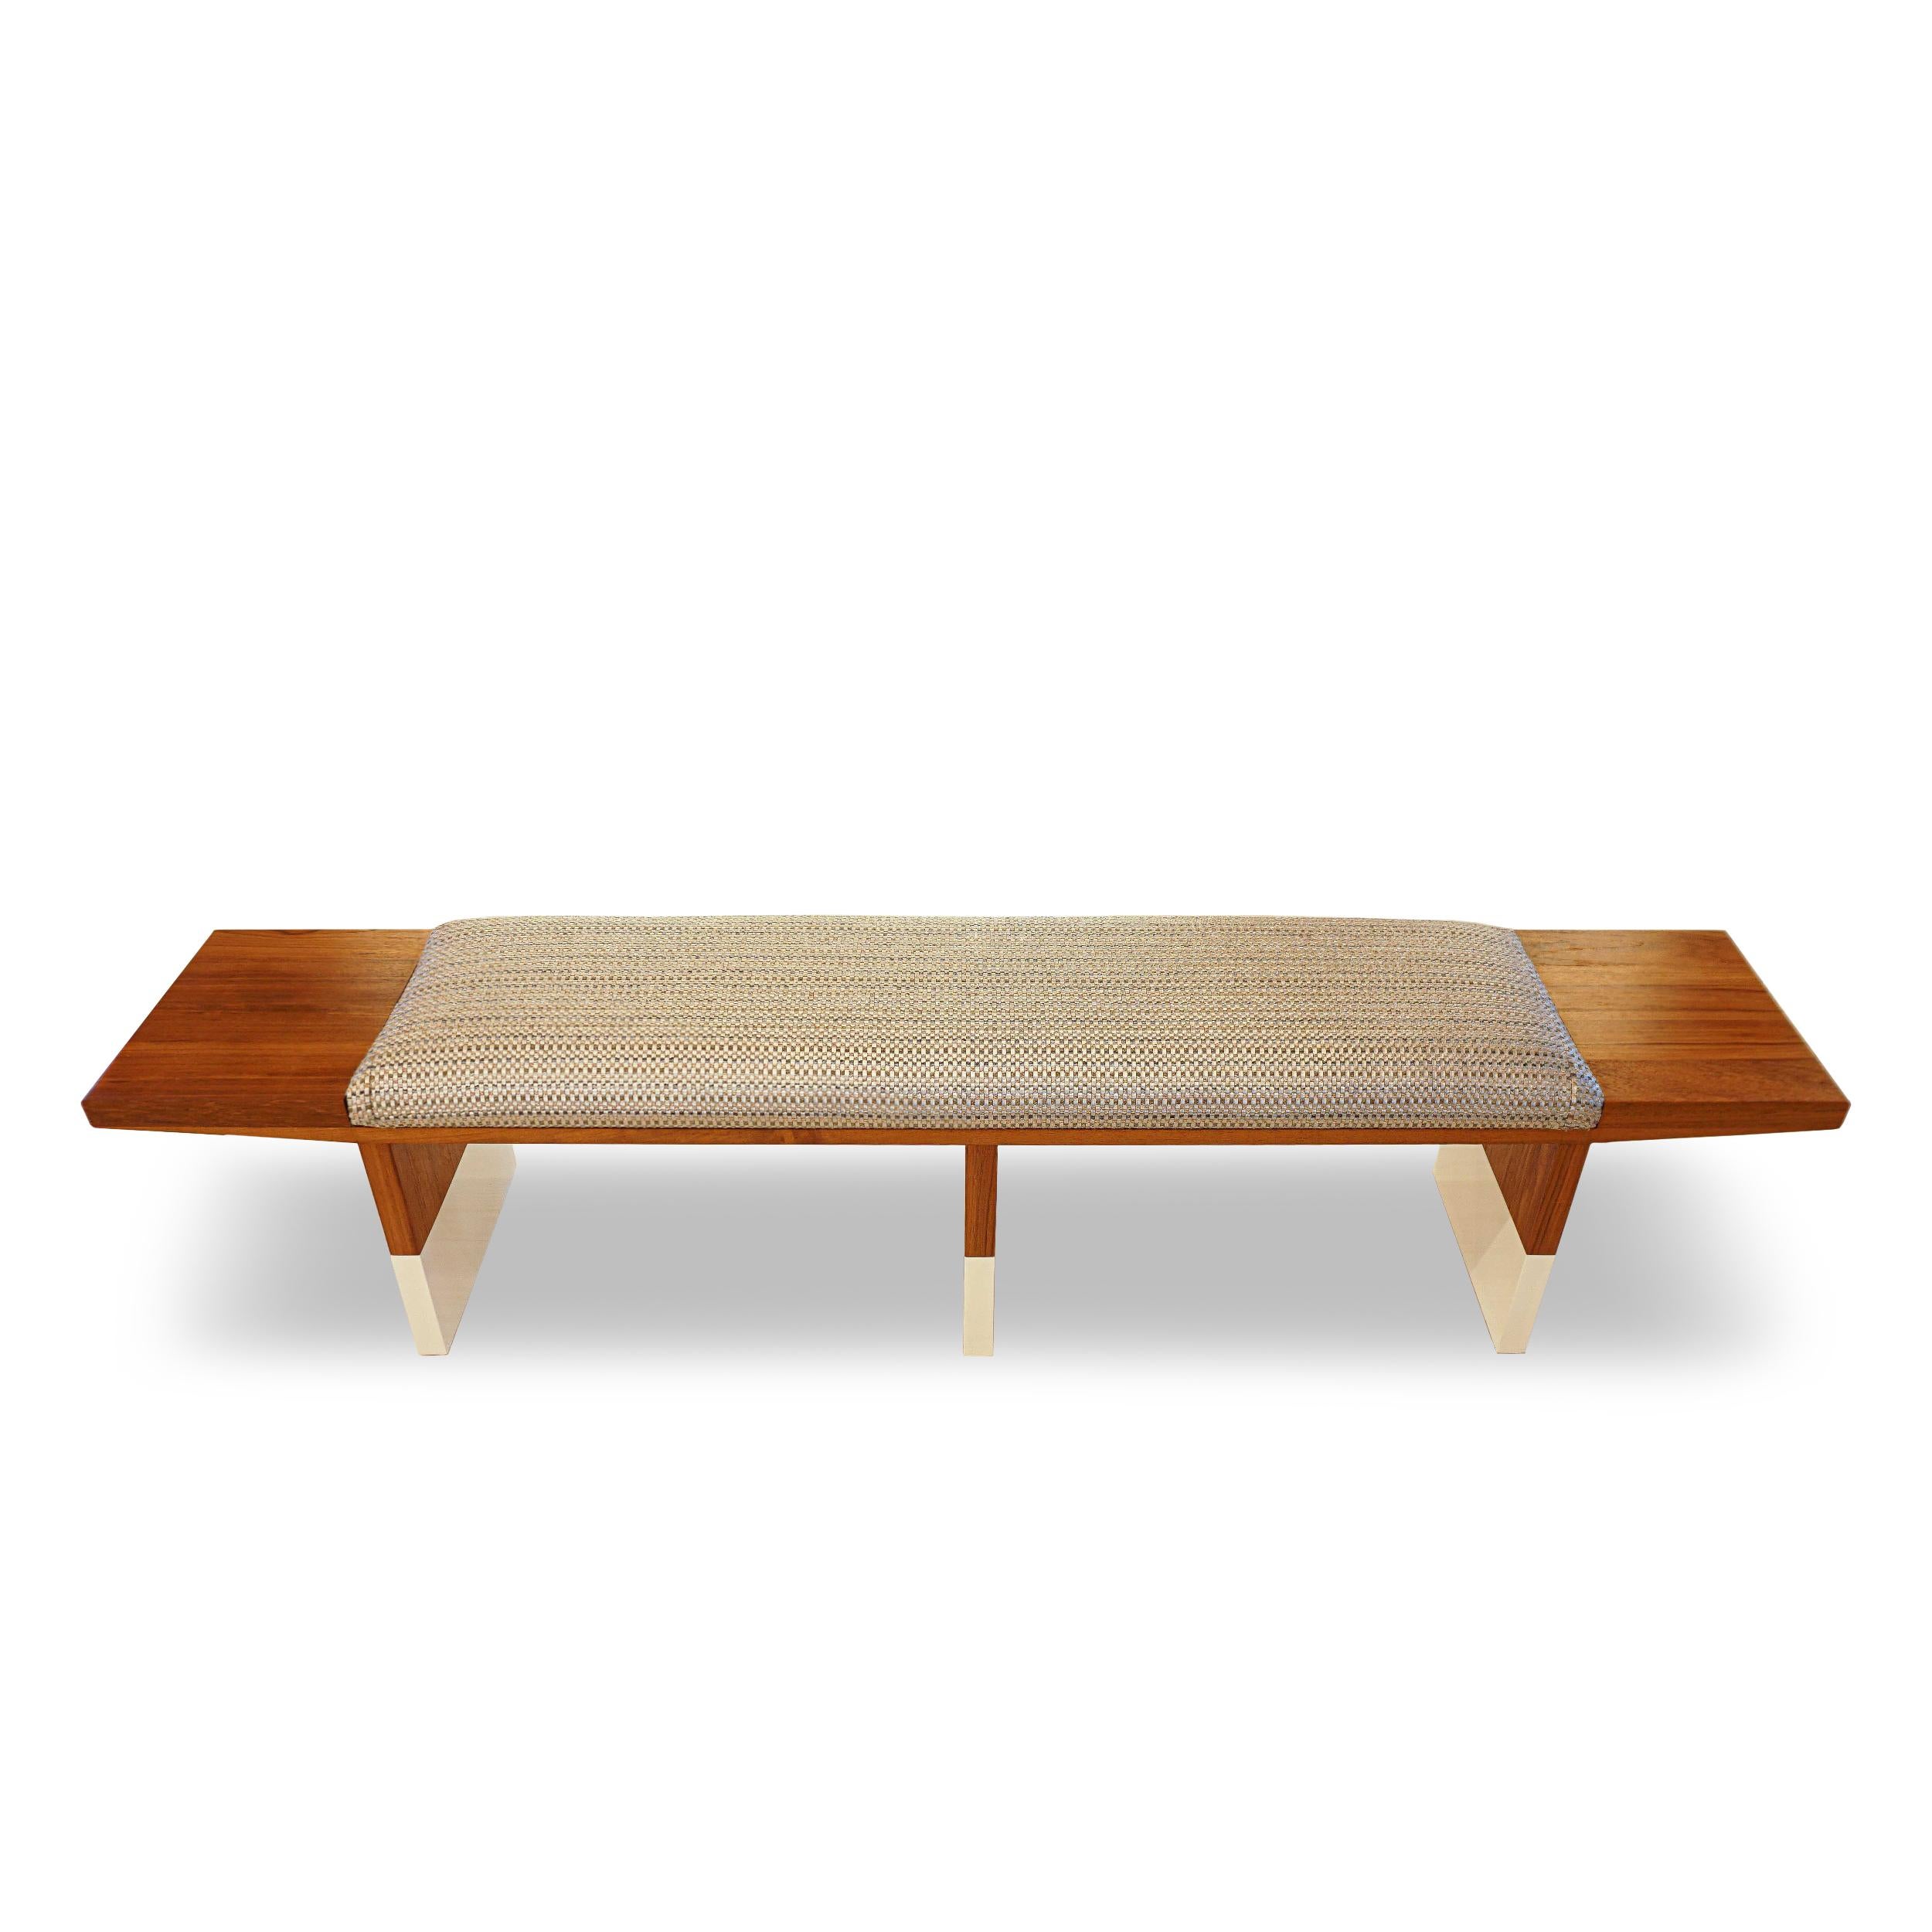 American Mid-Century Inspired Teak Bench with White Lacquer Dipped Legs For Sale